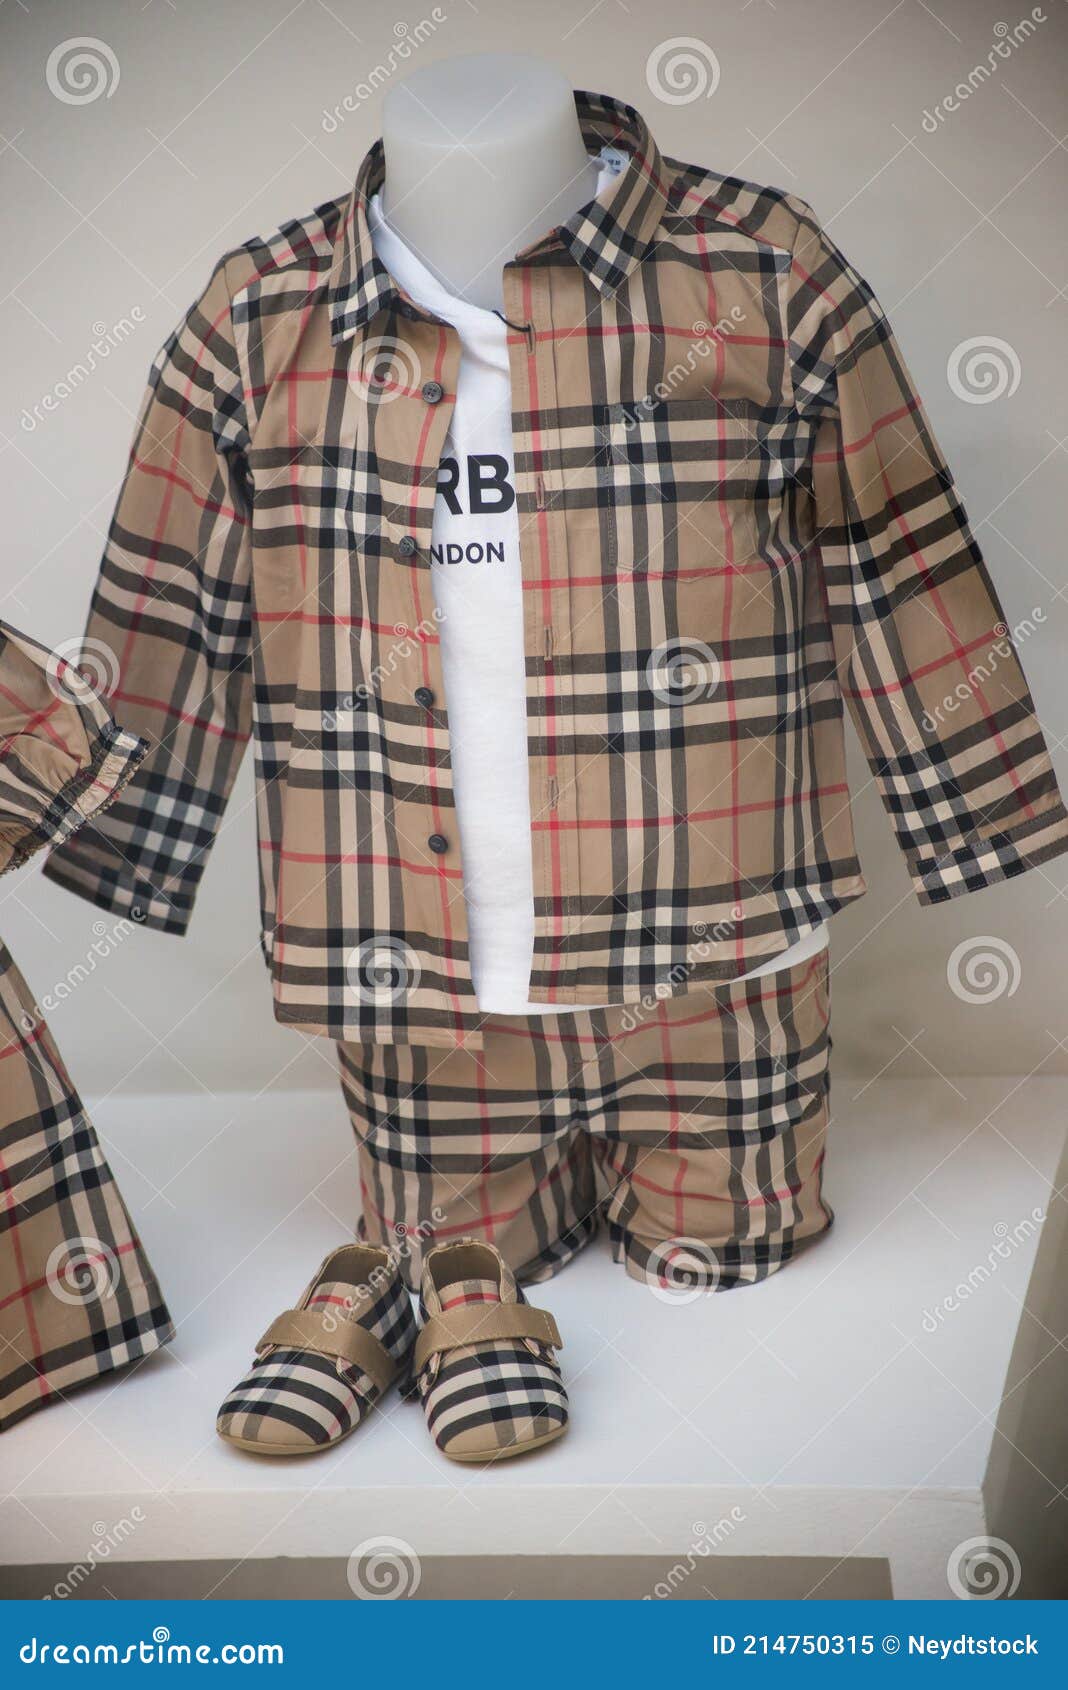 Burberry Pattern Photos - & Royalty-Free Stock Photos Dreamstime